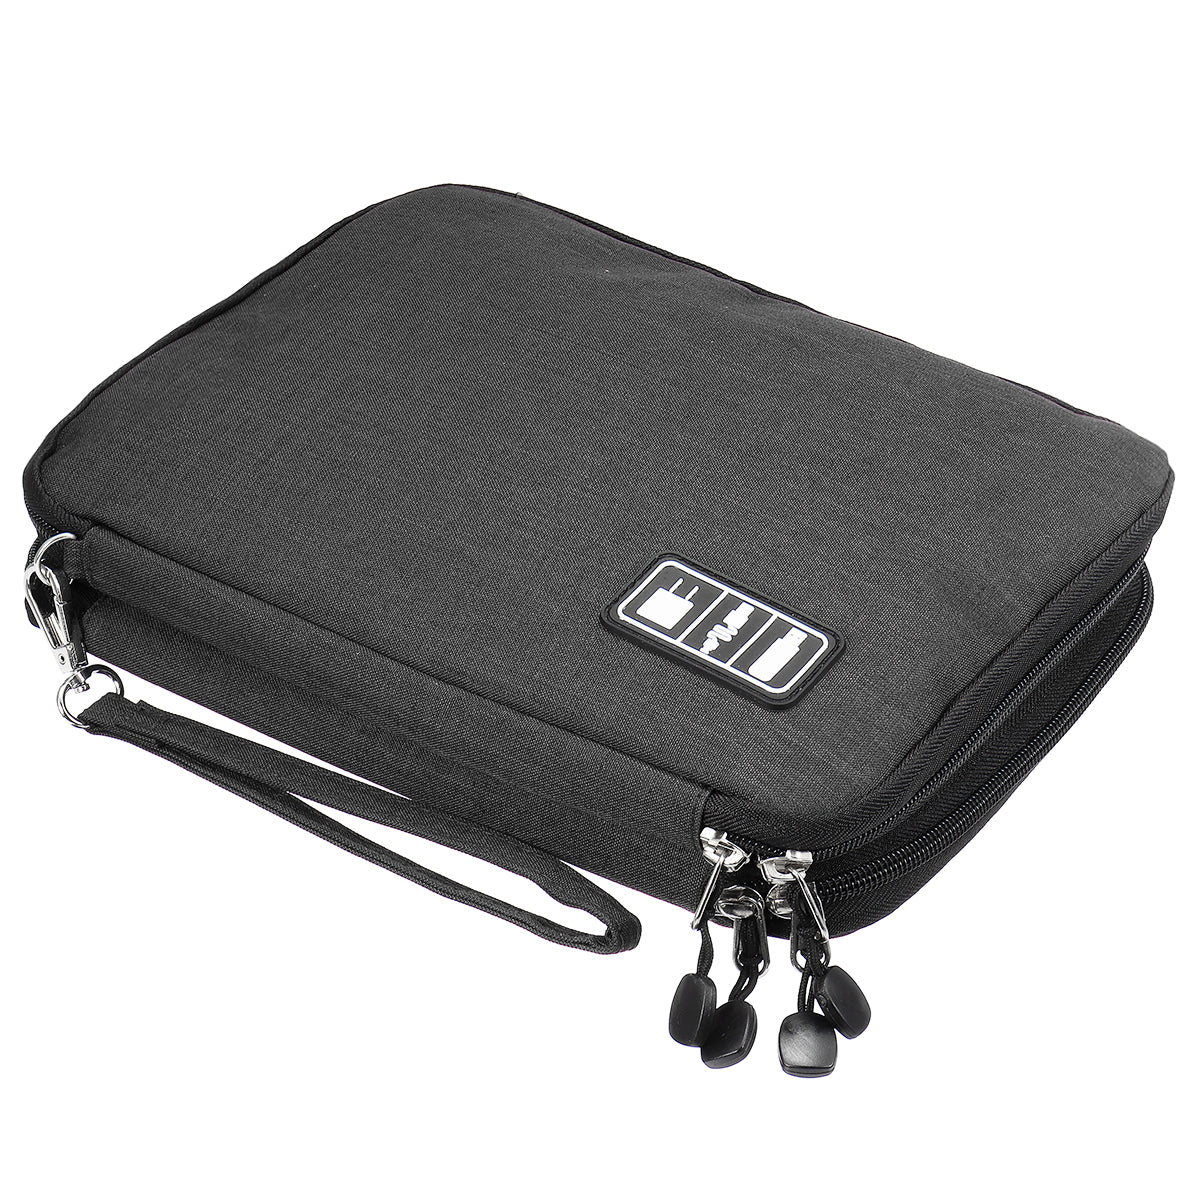 Portable Data Cable Storage Bag Double Layer USB Gadget Organizer Digital Pouch Outdoor Travel